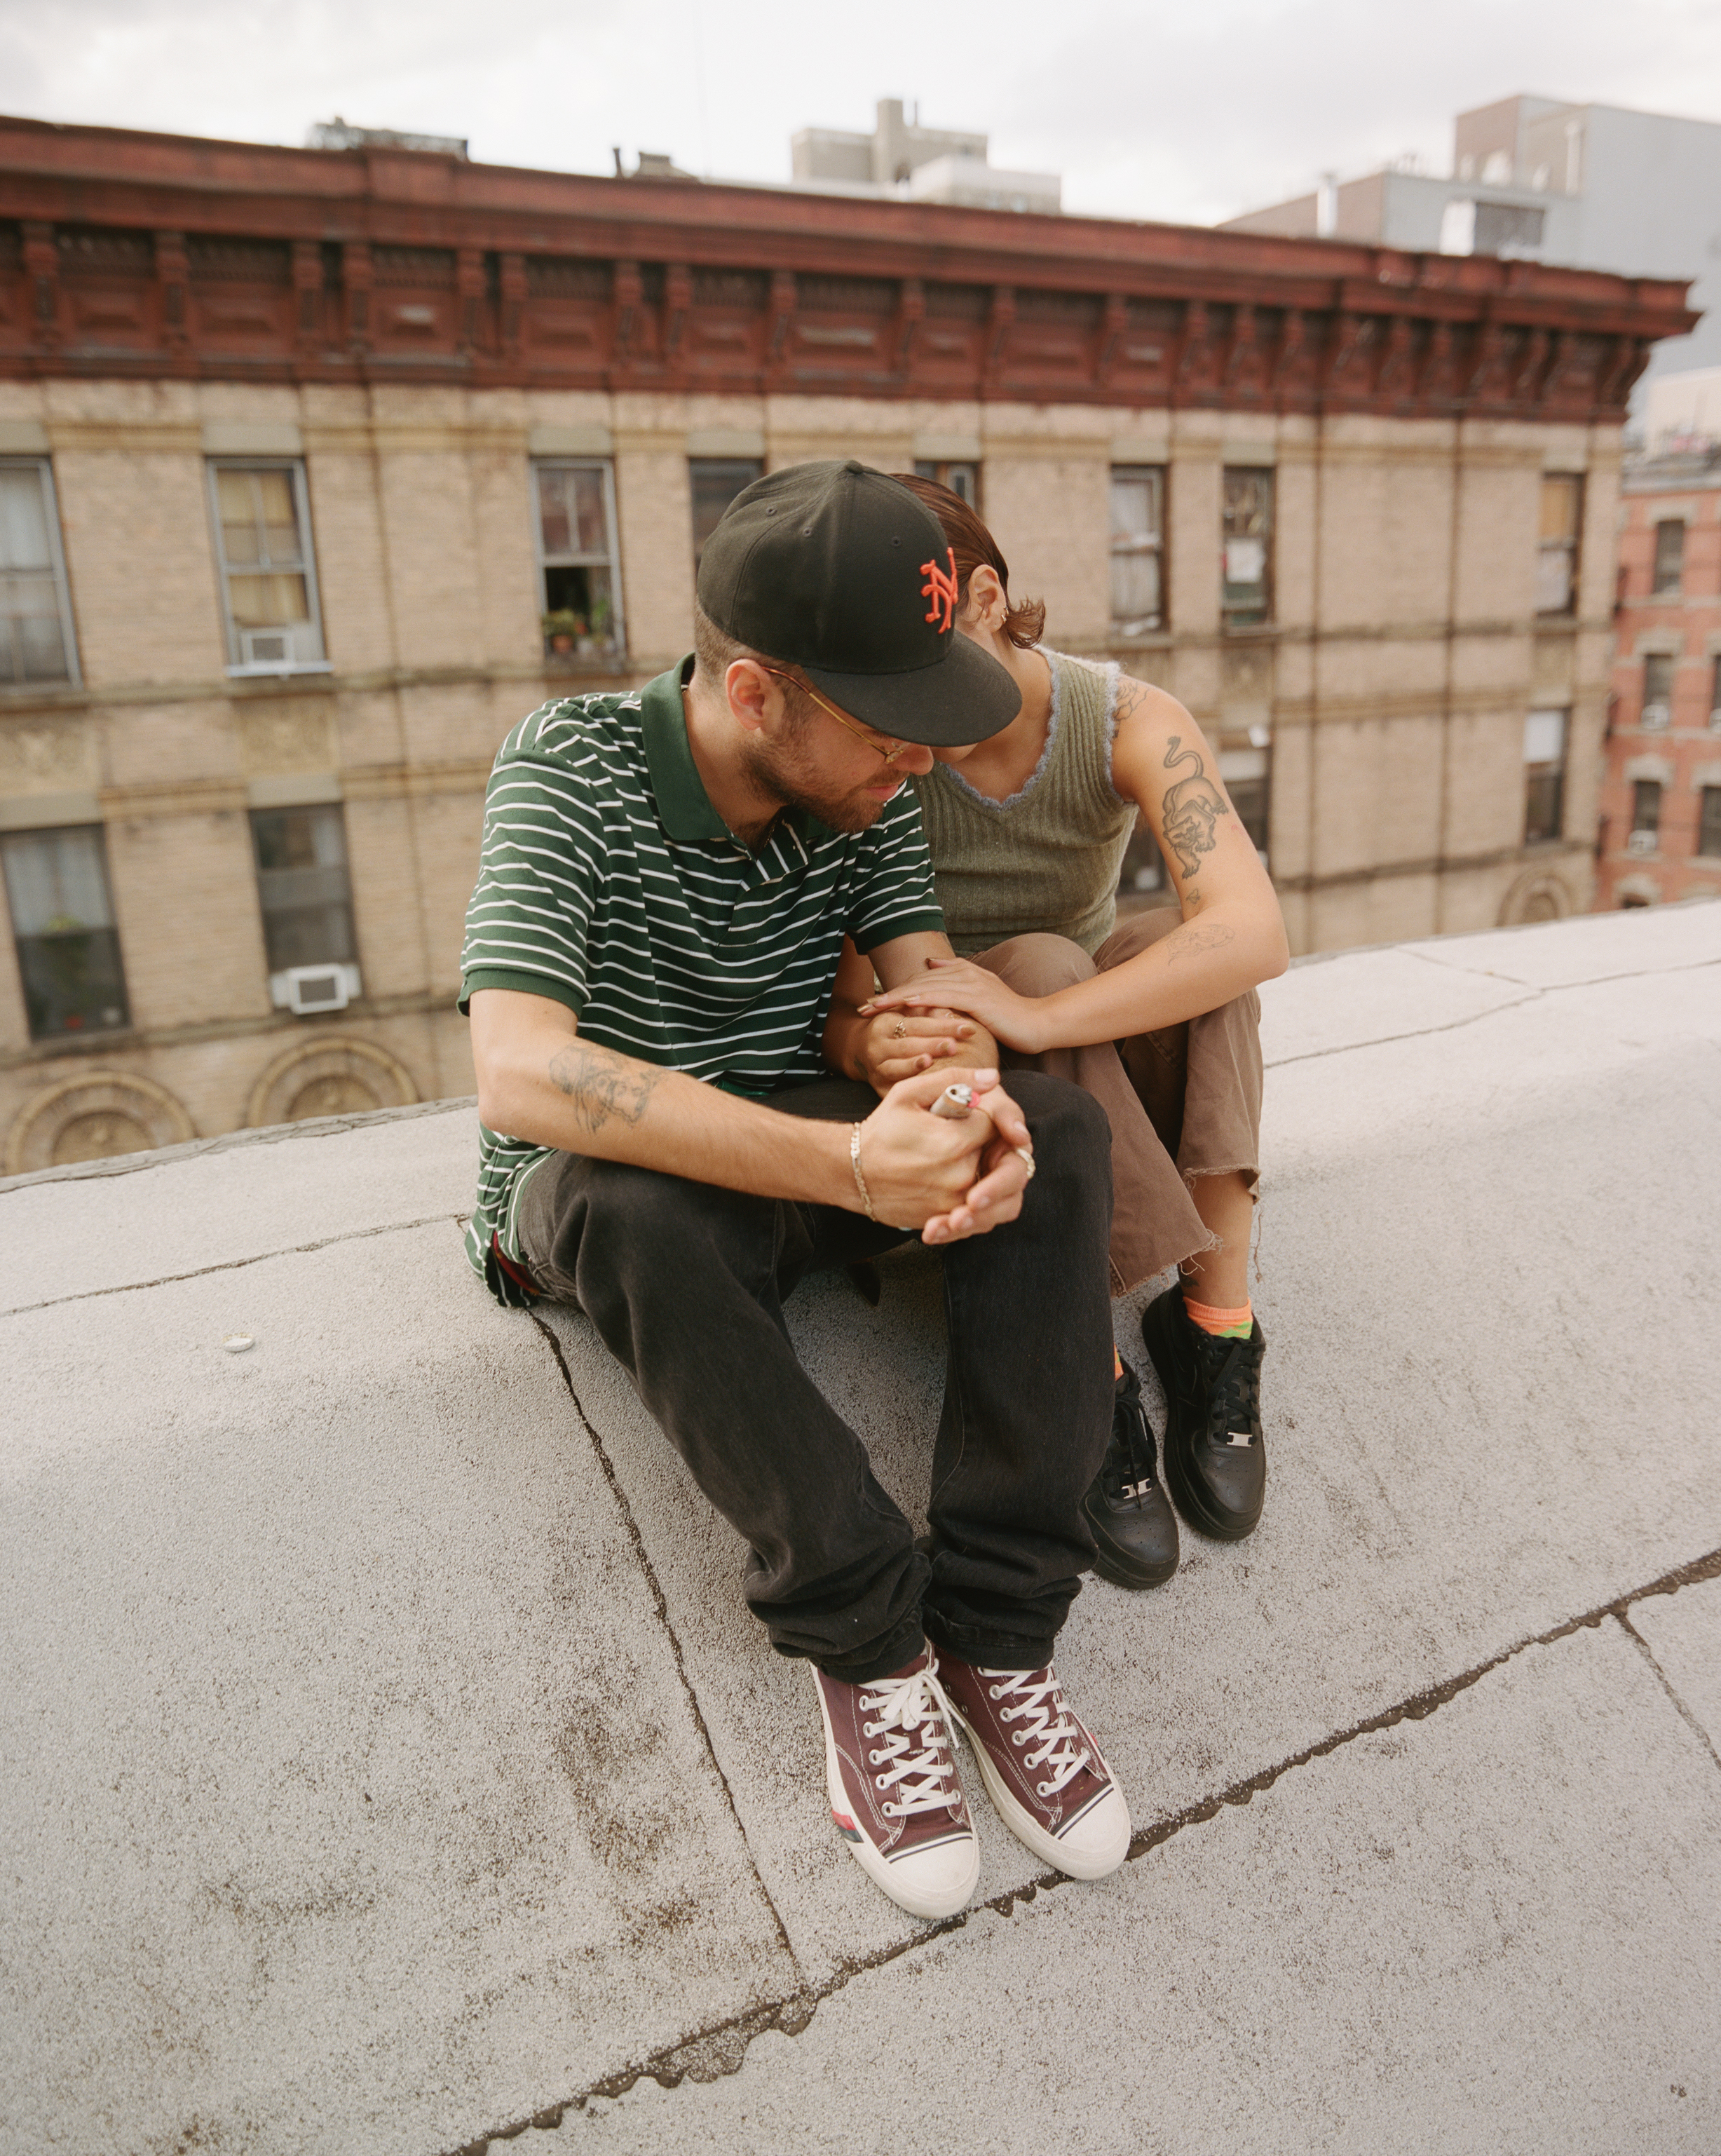 wiki and his girlfriend embracing on a new york rooftop